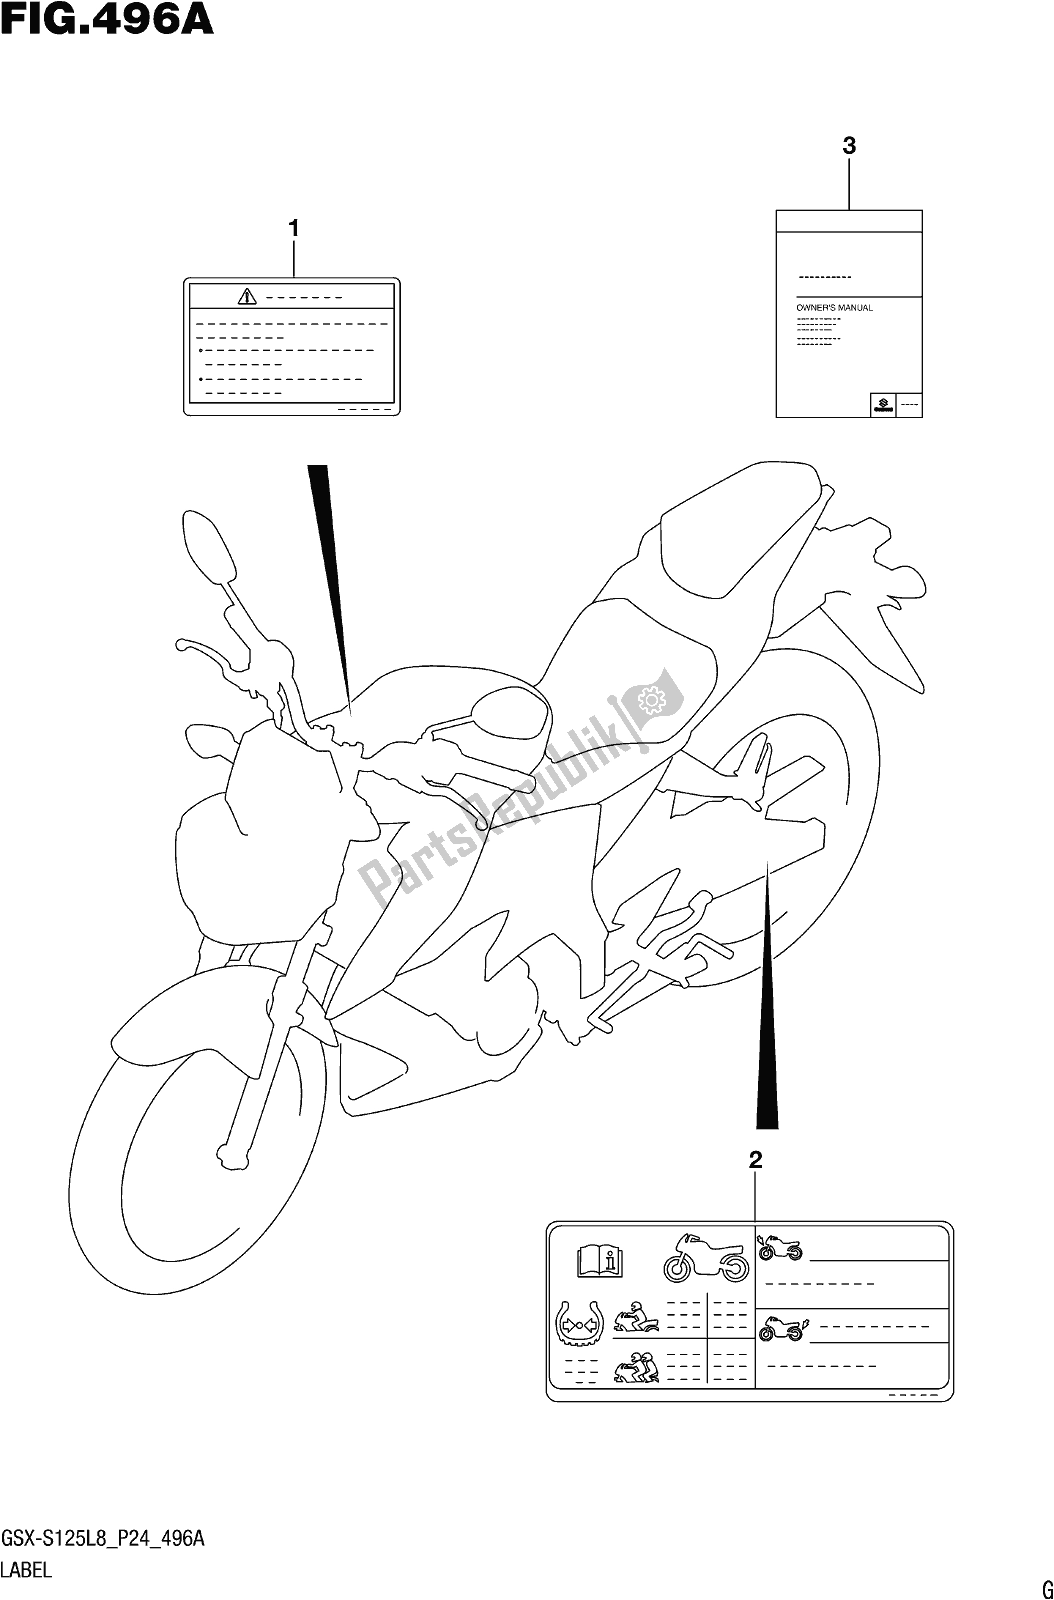 All parts for the Fig. 496a Label of the Suzuki Gsx-s 125 ML 2018